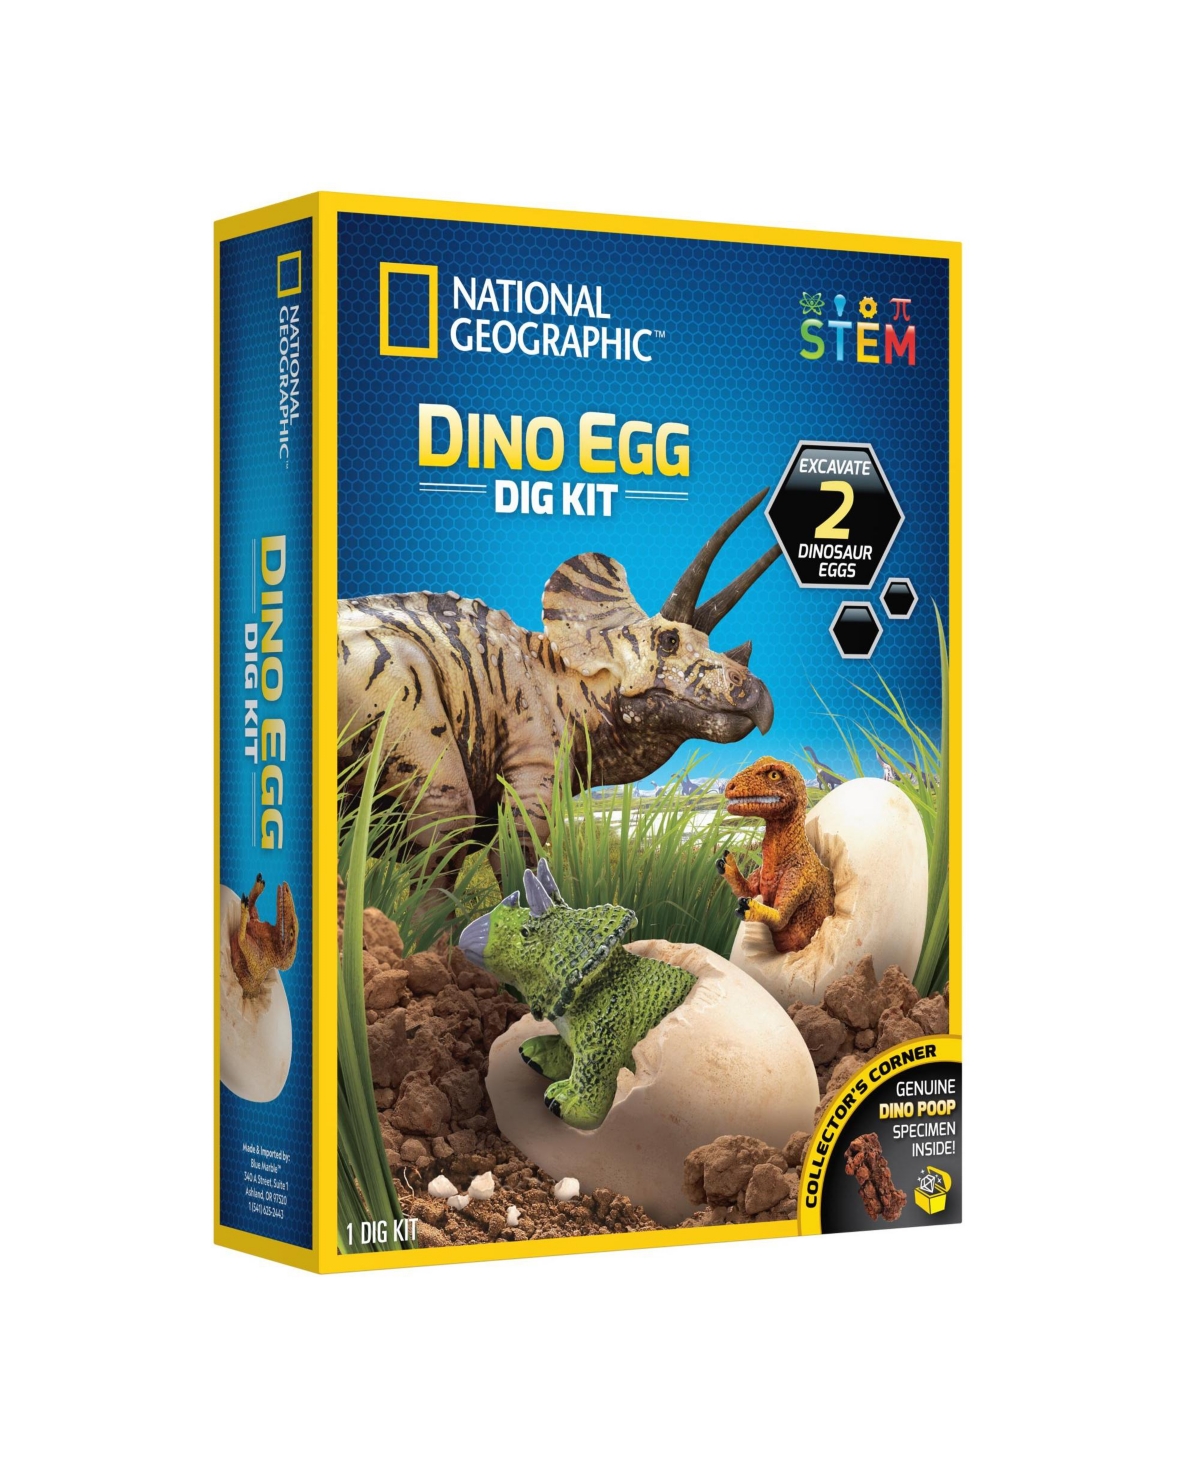 National Geographic Dino Egg Dig Kit In N,a